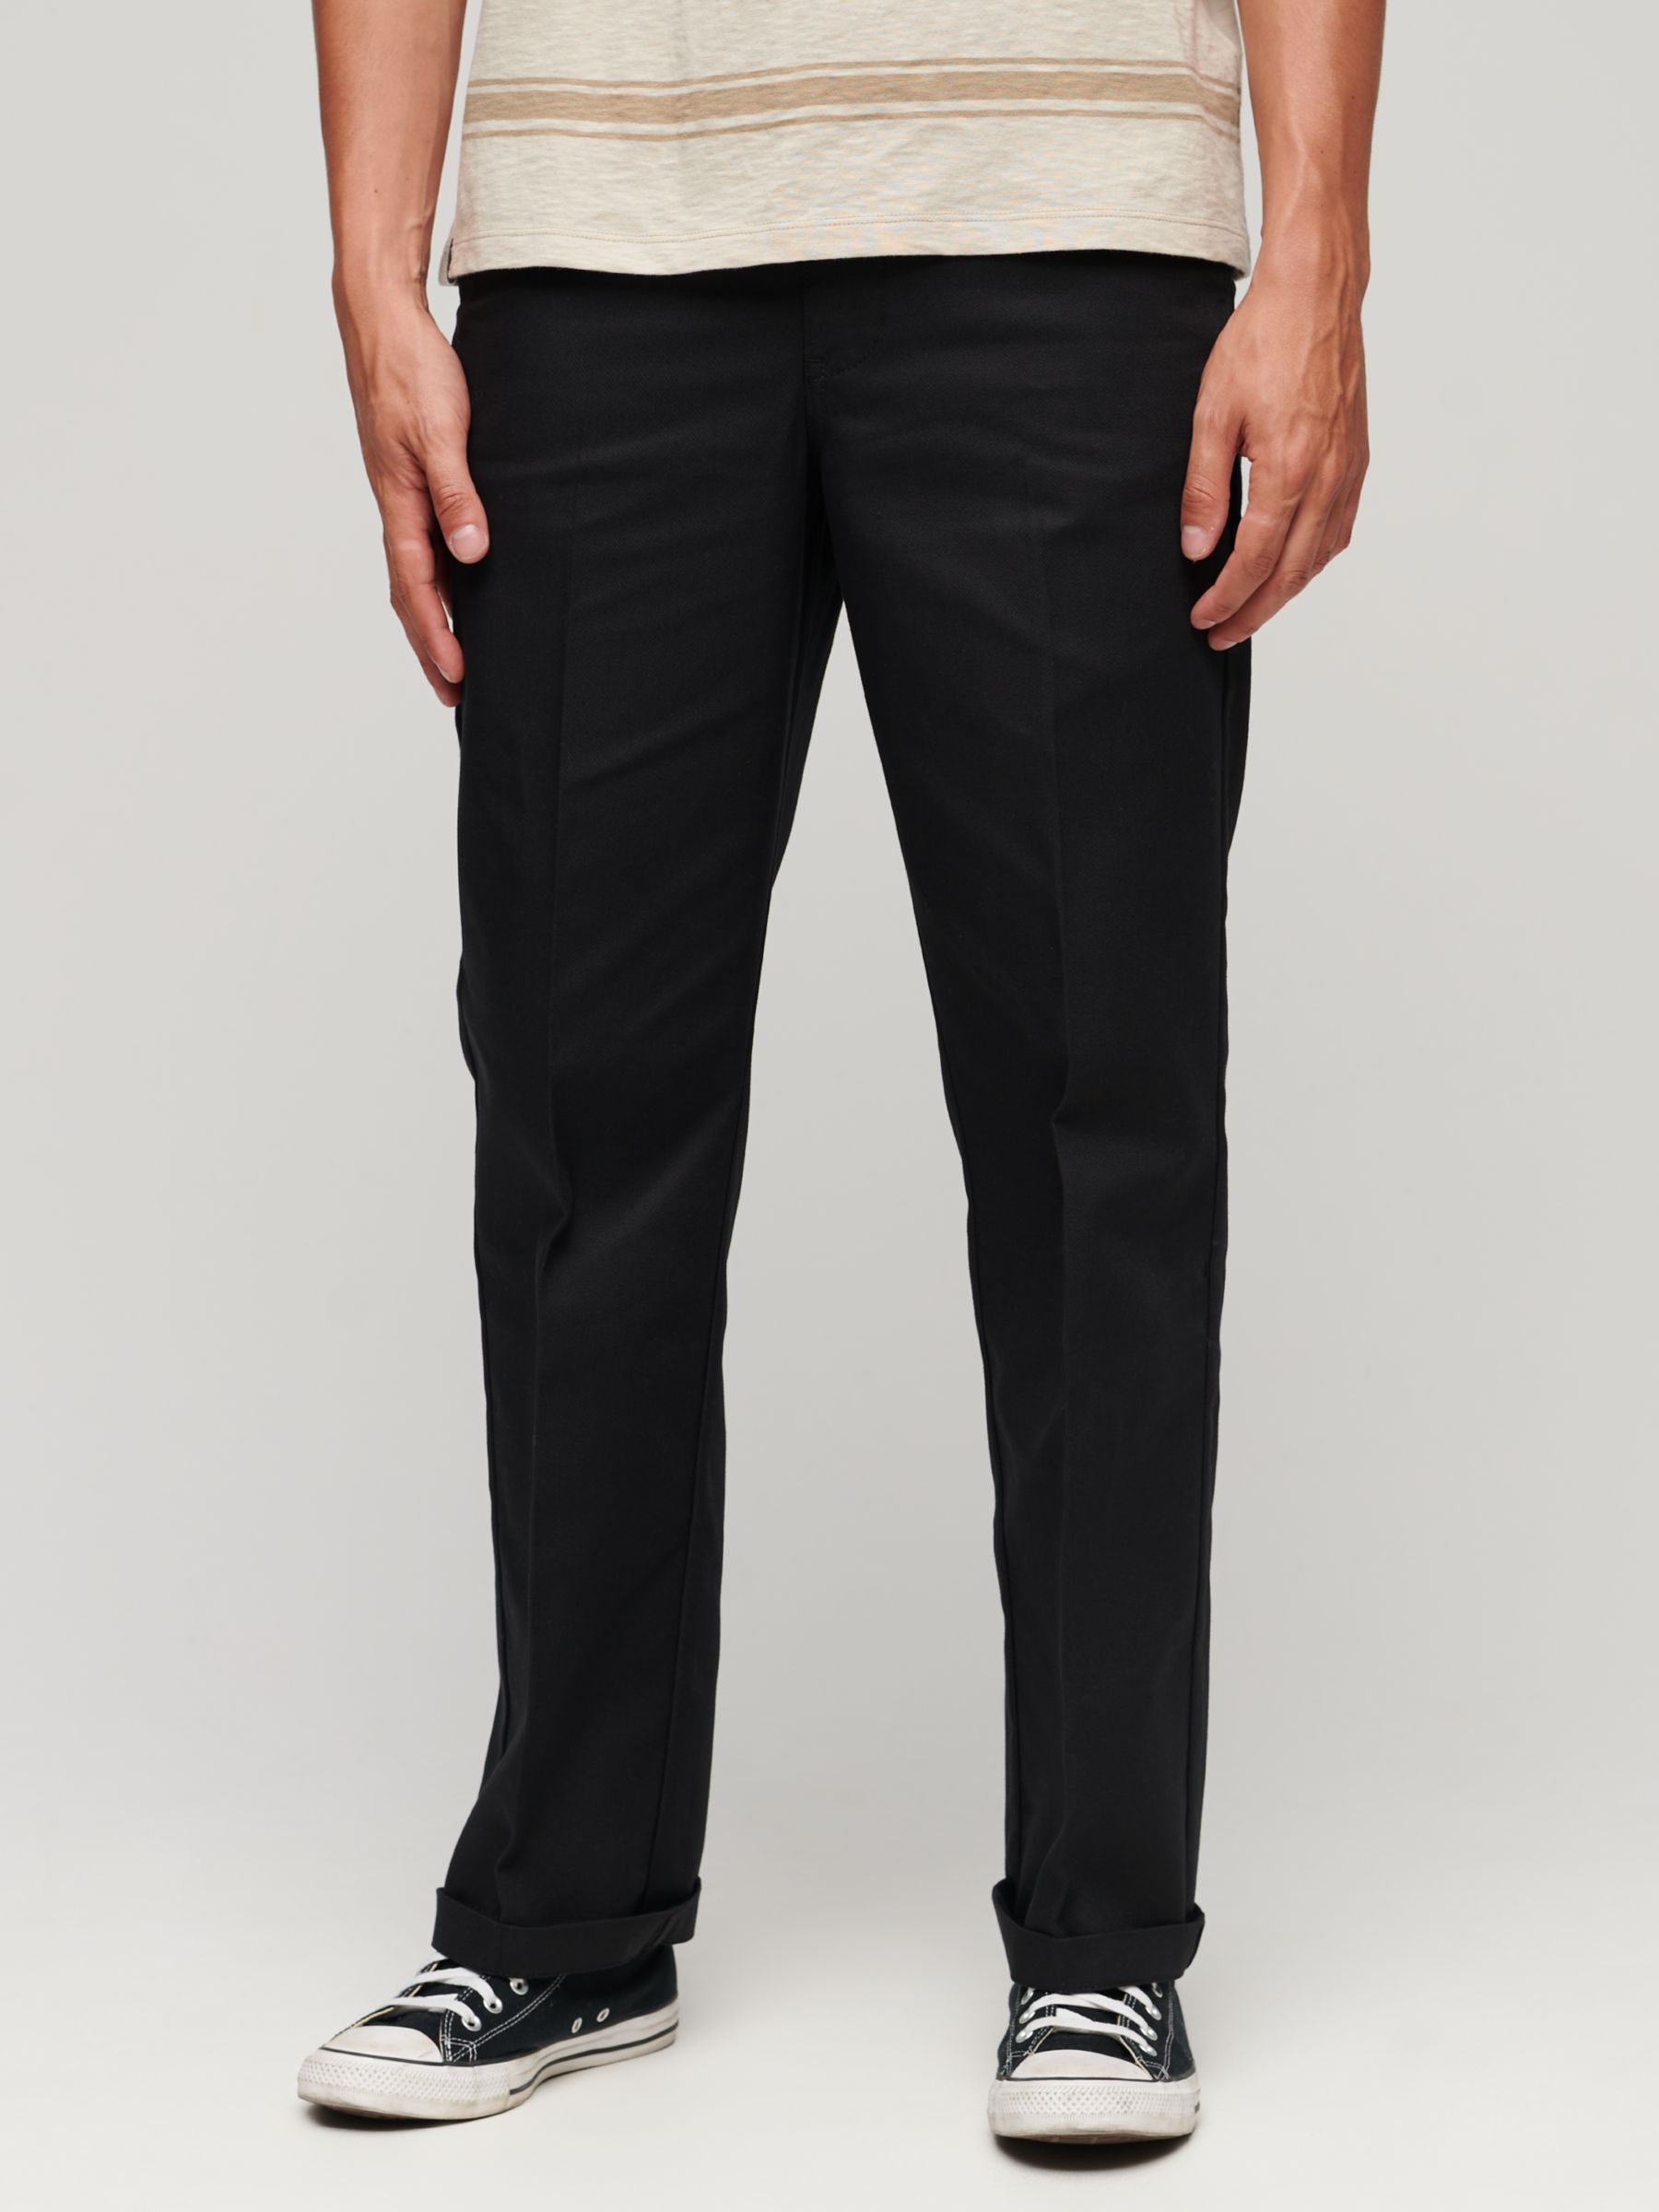 Buy Superdry Straight Chino Trousers, Black Online at johnlewis.com